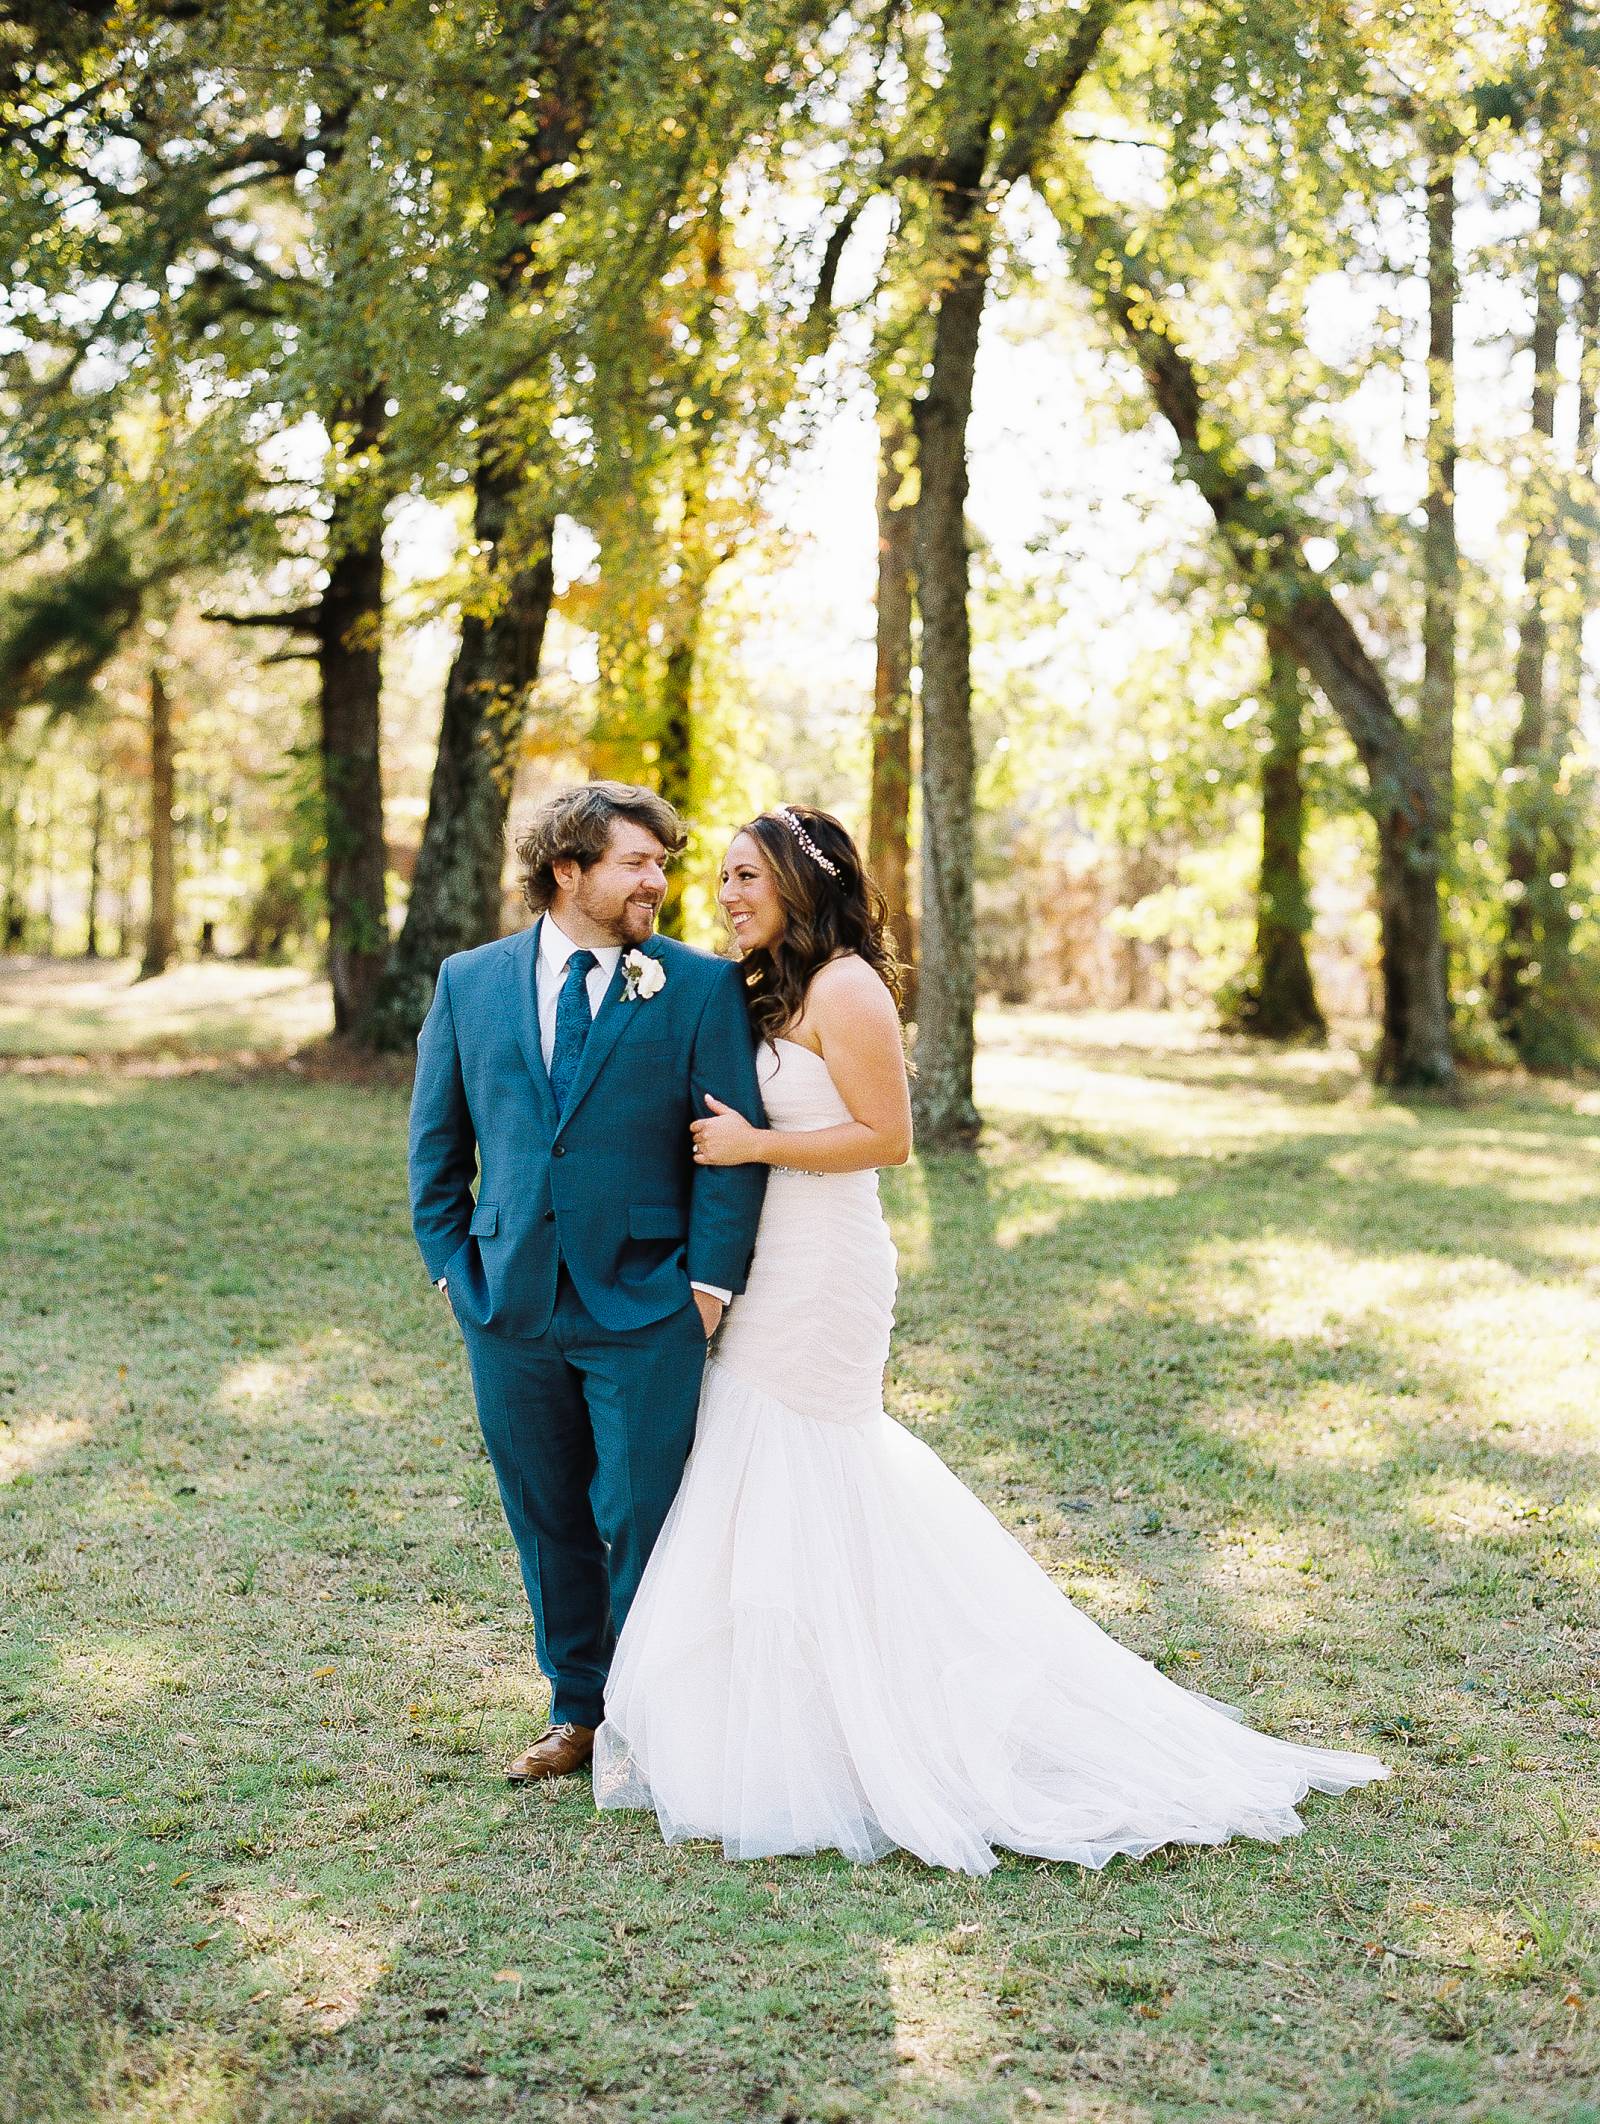 Gorgeous backyard wedding in Arkansas surrounded by fall foliage ...